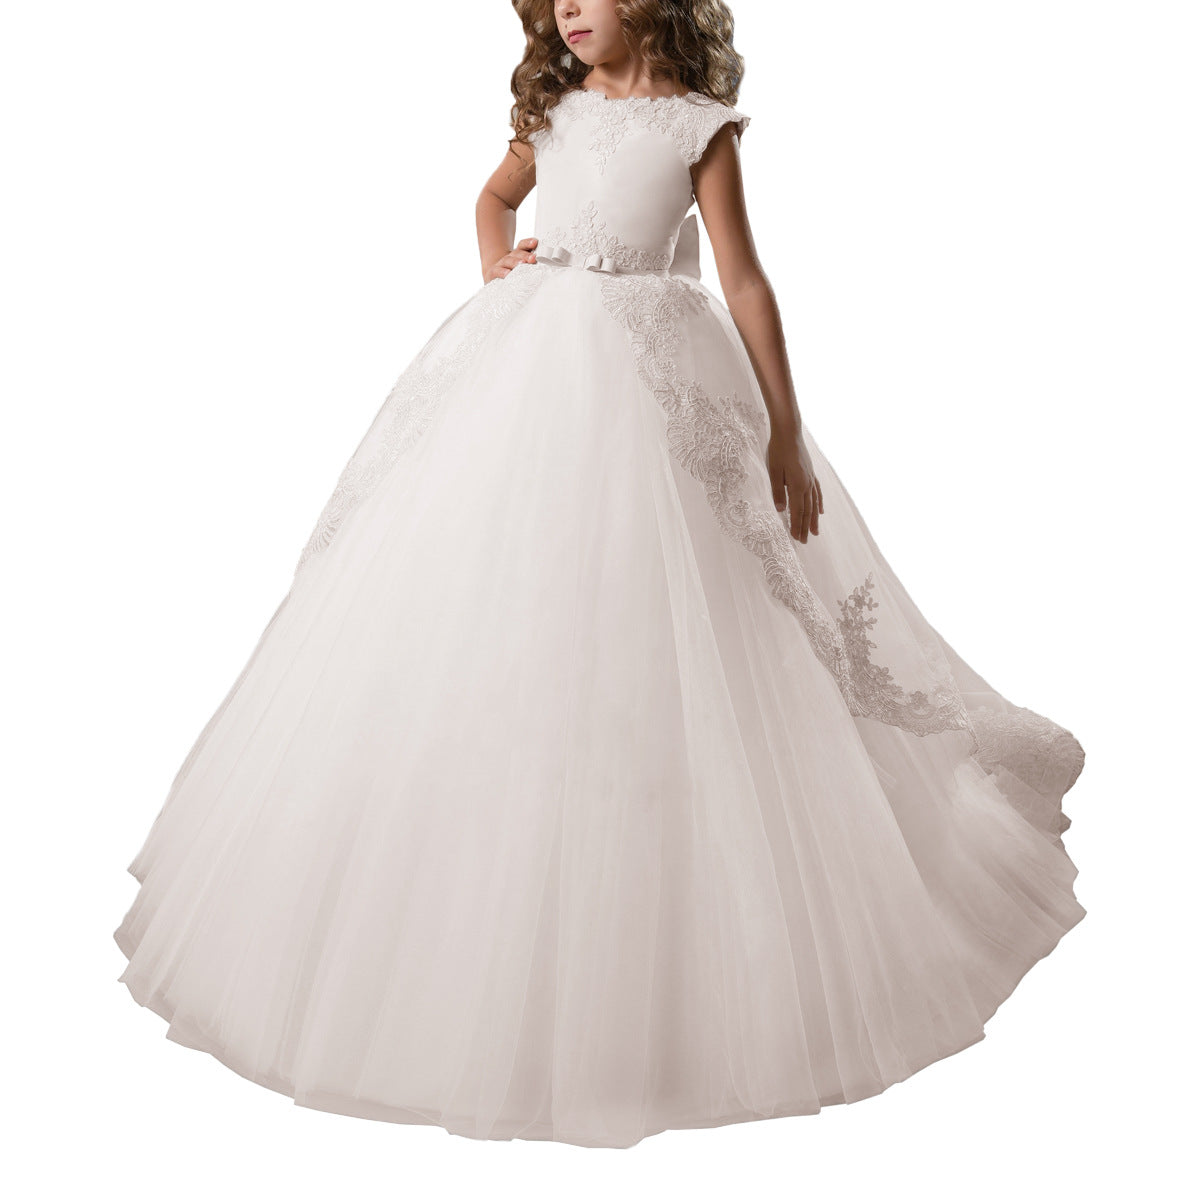 Flower Girl Dress first communion Dress Tulle Satin Lace Cap Sleeves Pageant Fancy Girls Ball Gown Princess kids Birthday Dresses